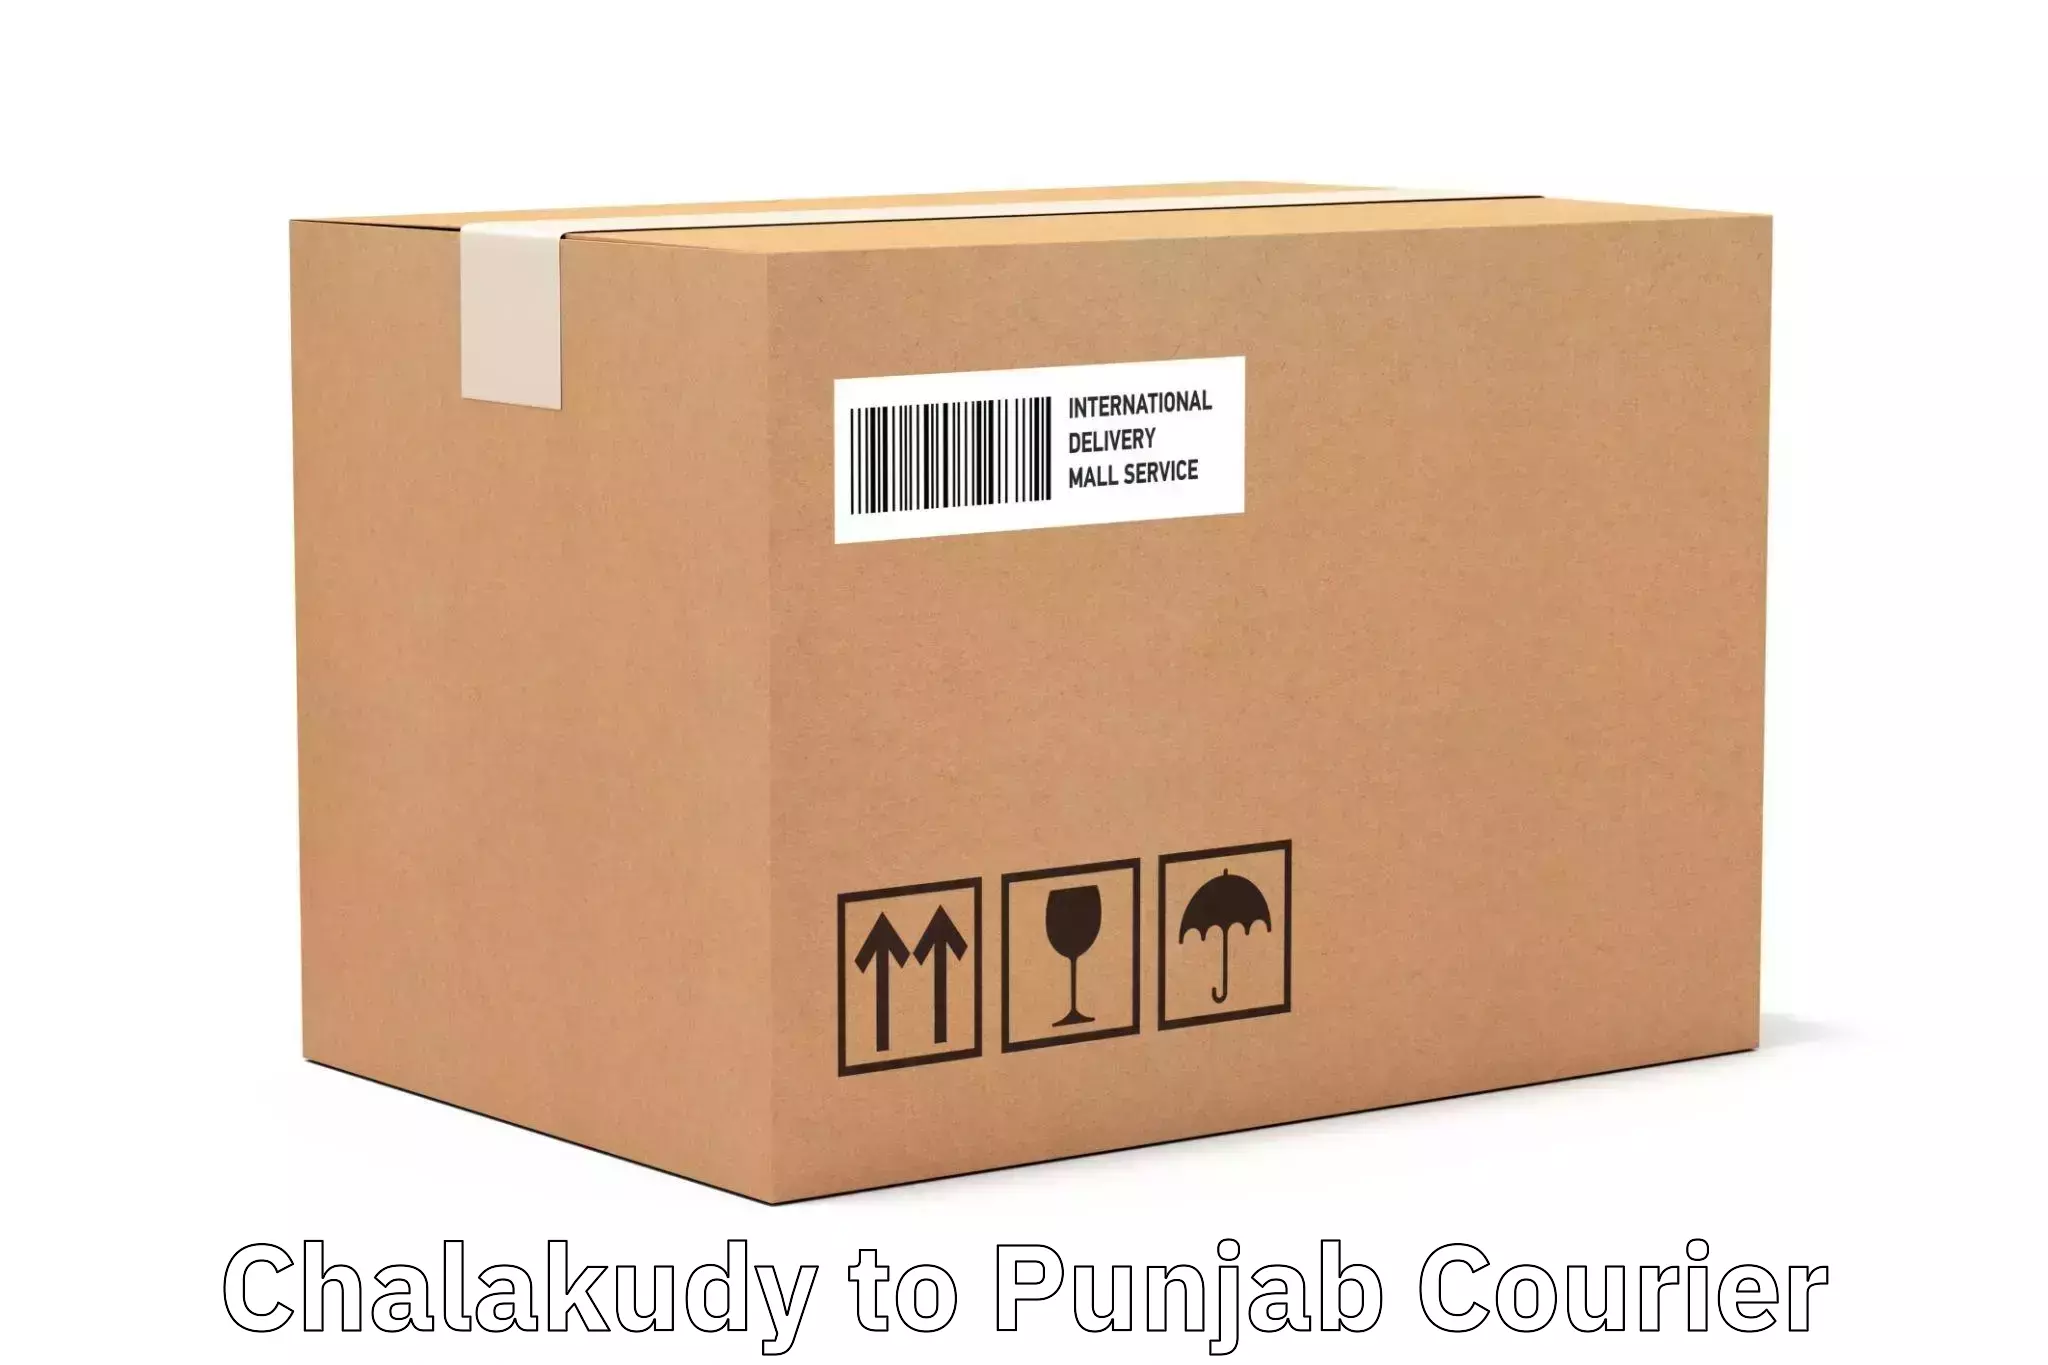 Express delivery capabilities Chalakudy to Patiala